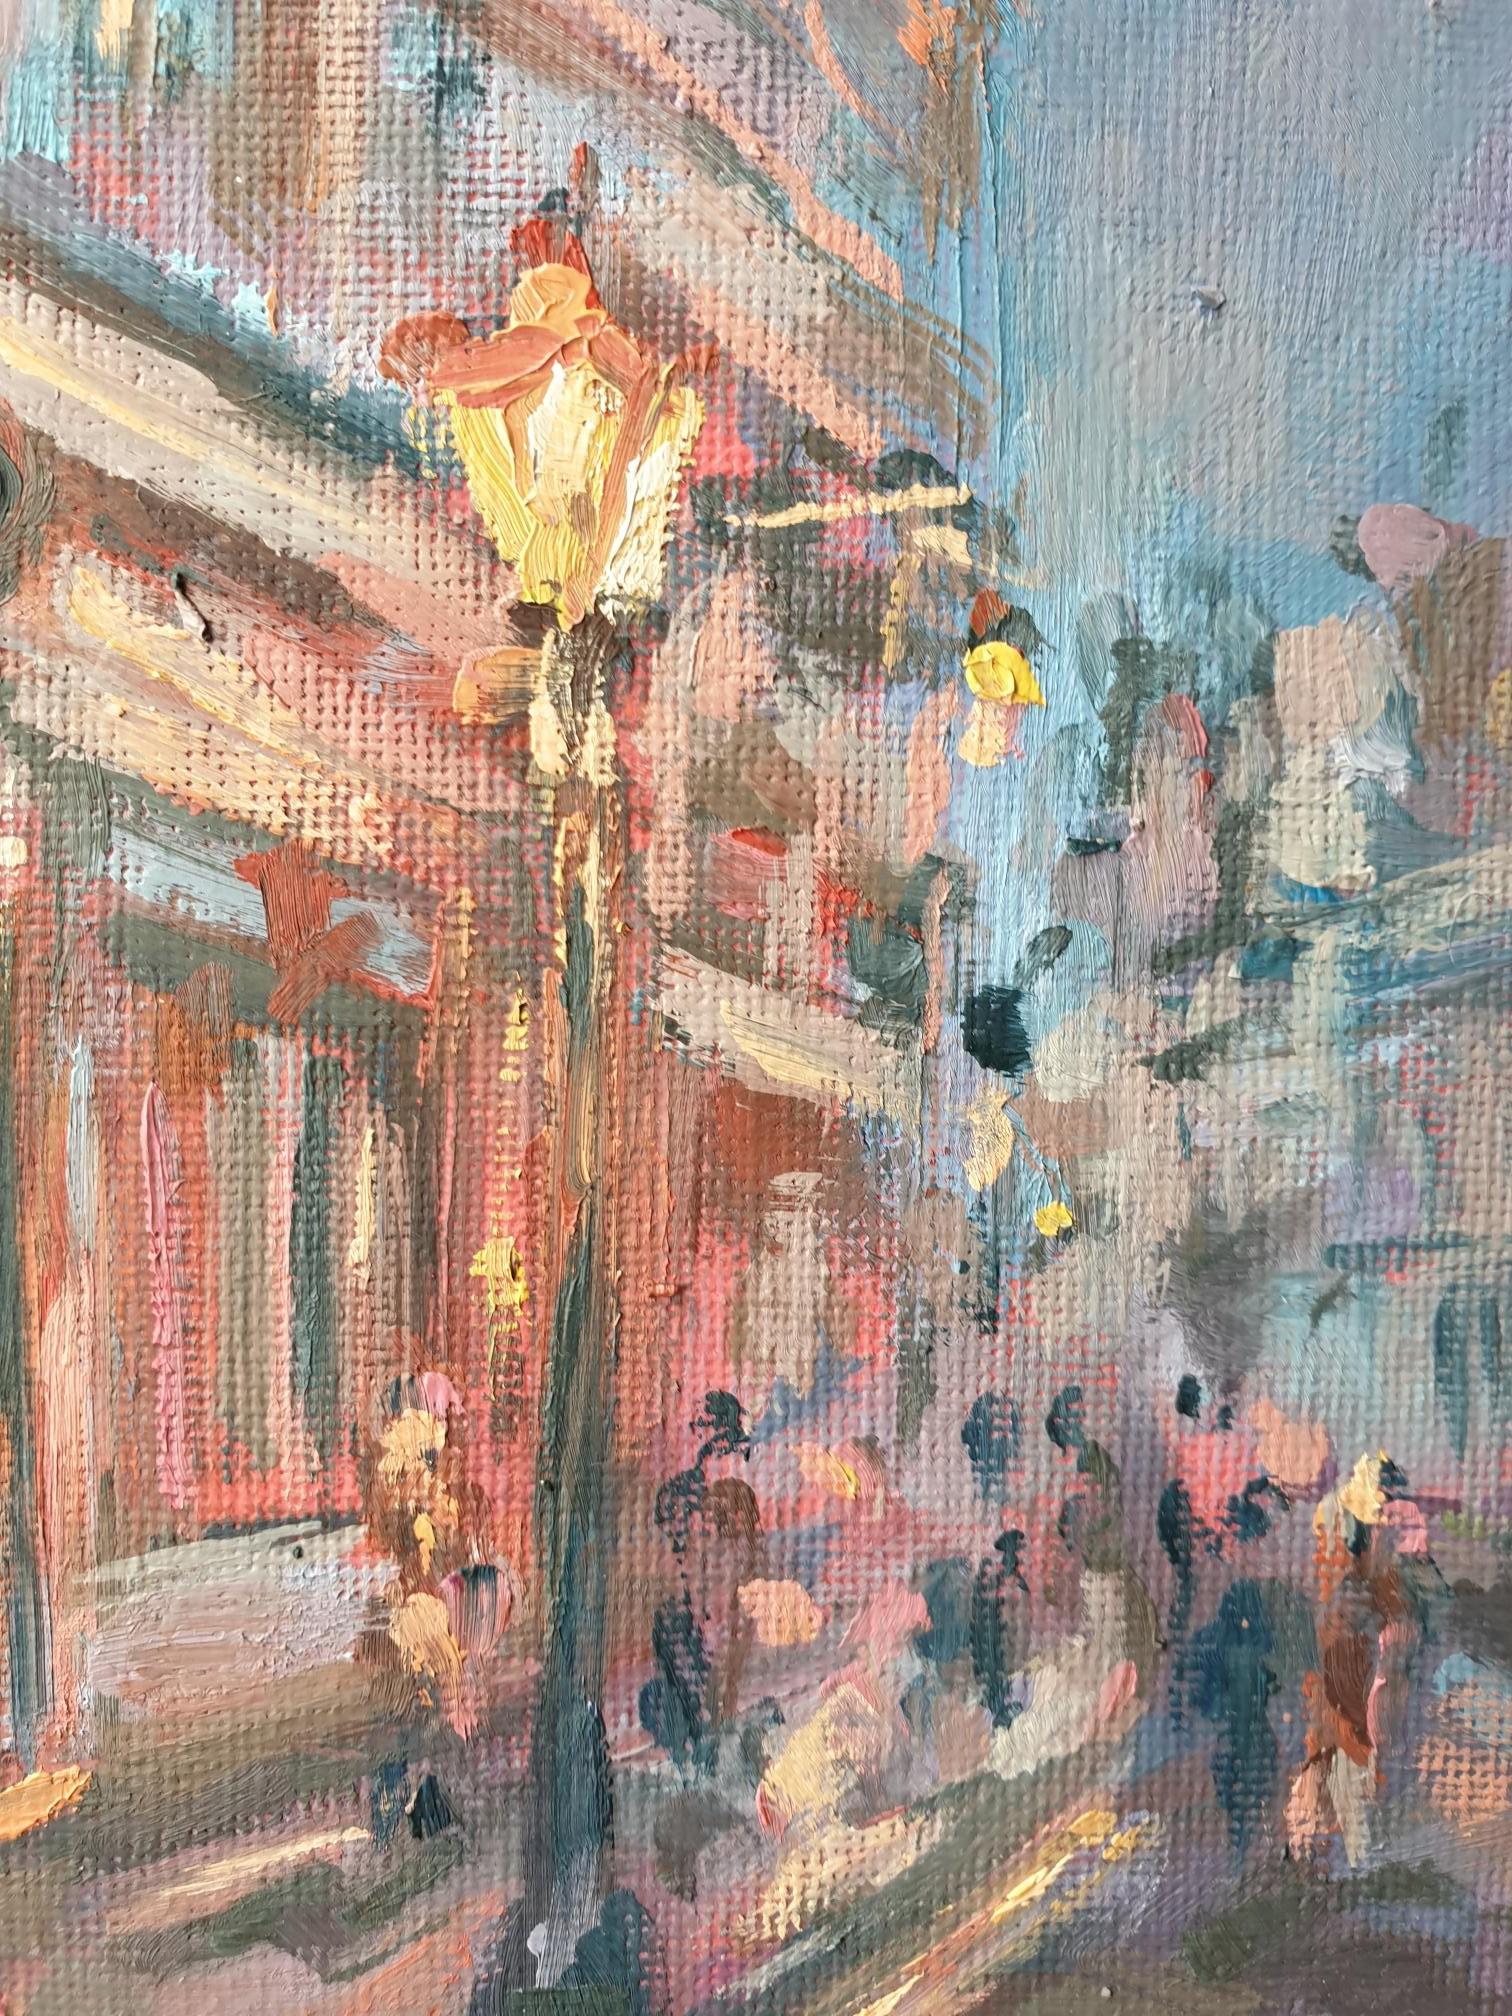 Turl Street - Impressionist Painting by Charmaine Chaudry